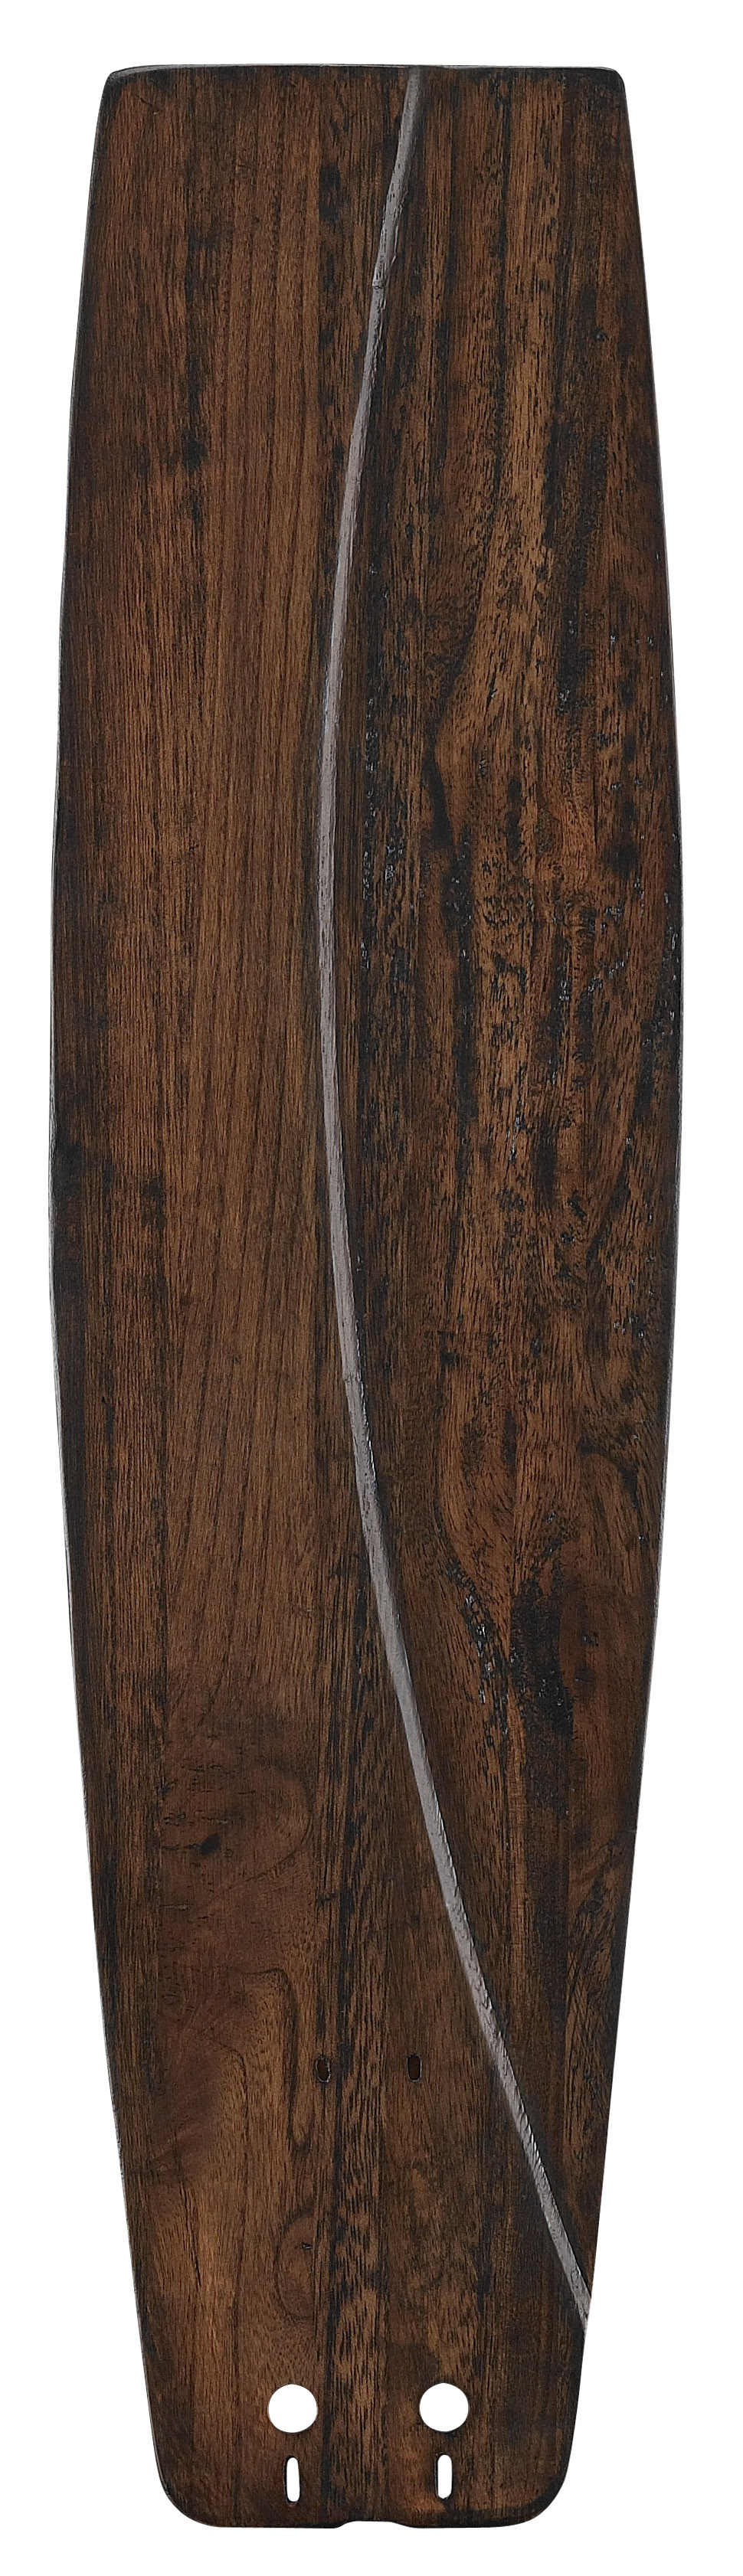 26 inch Soft Rounded Carved Wood Blade - WA